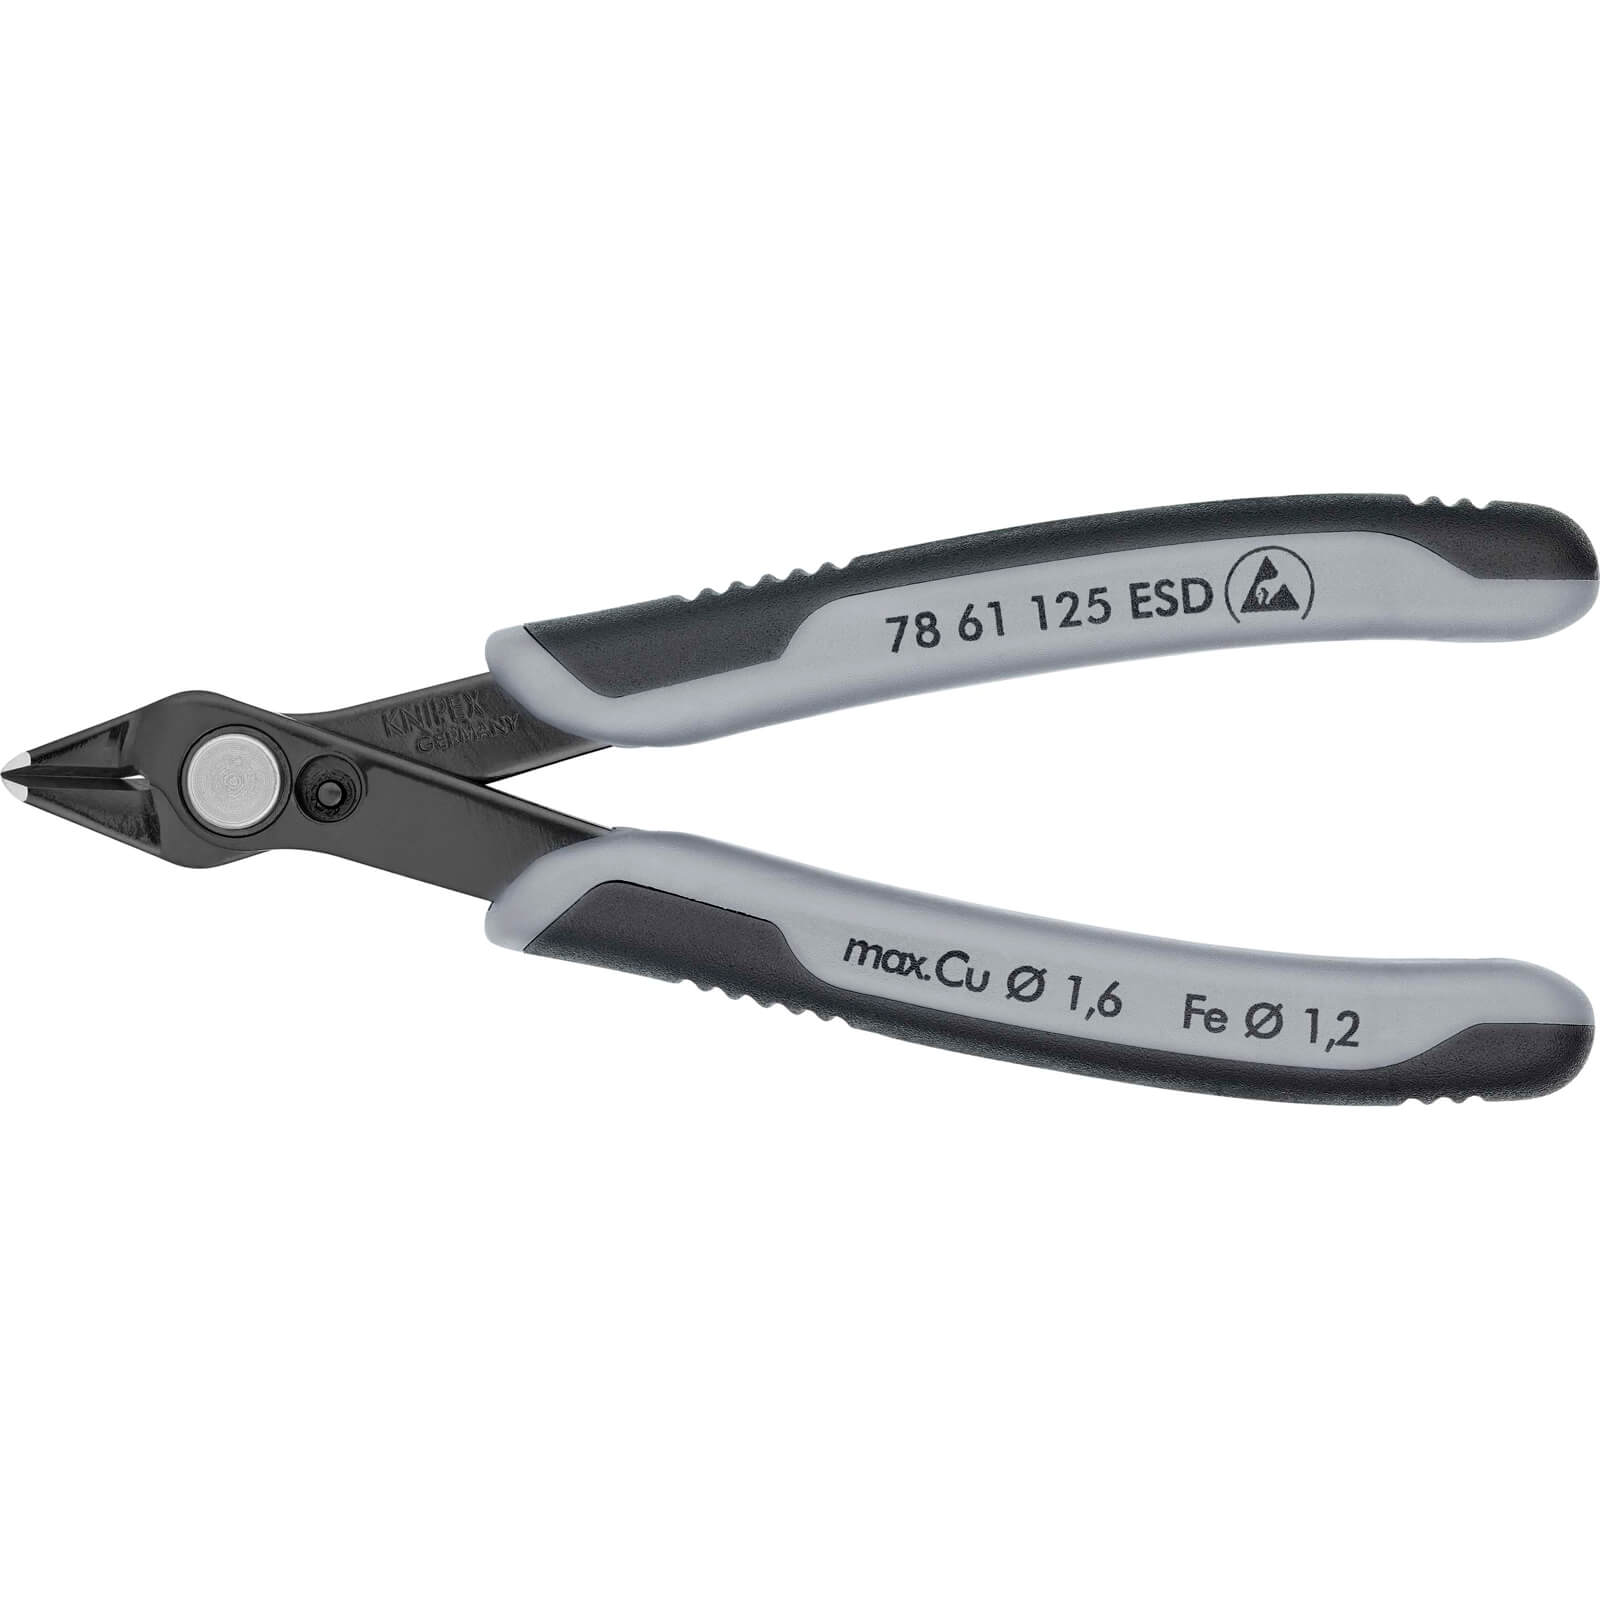 Image of Knipex 78 61 Electronics Super Knips ESD Pliers 125mm